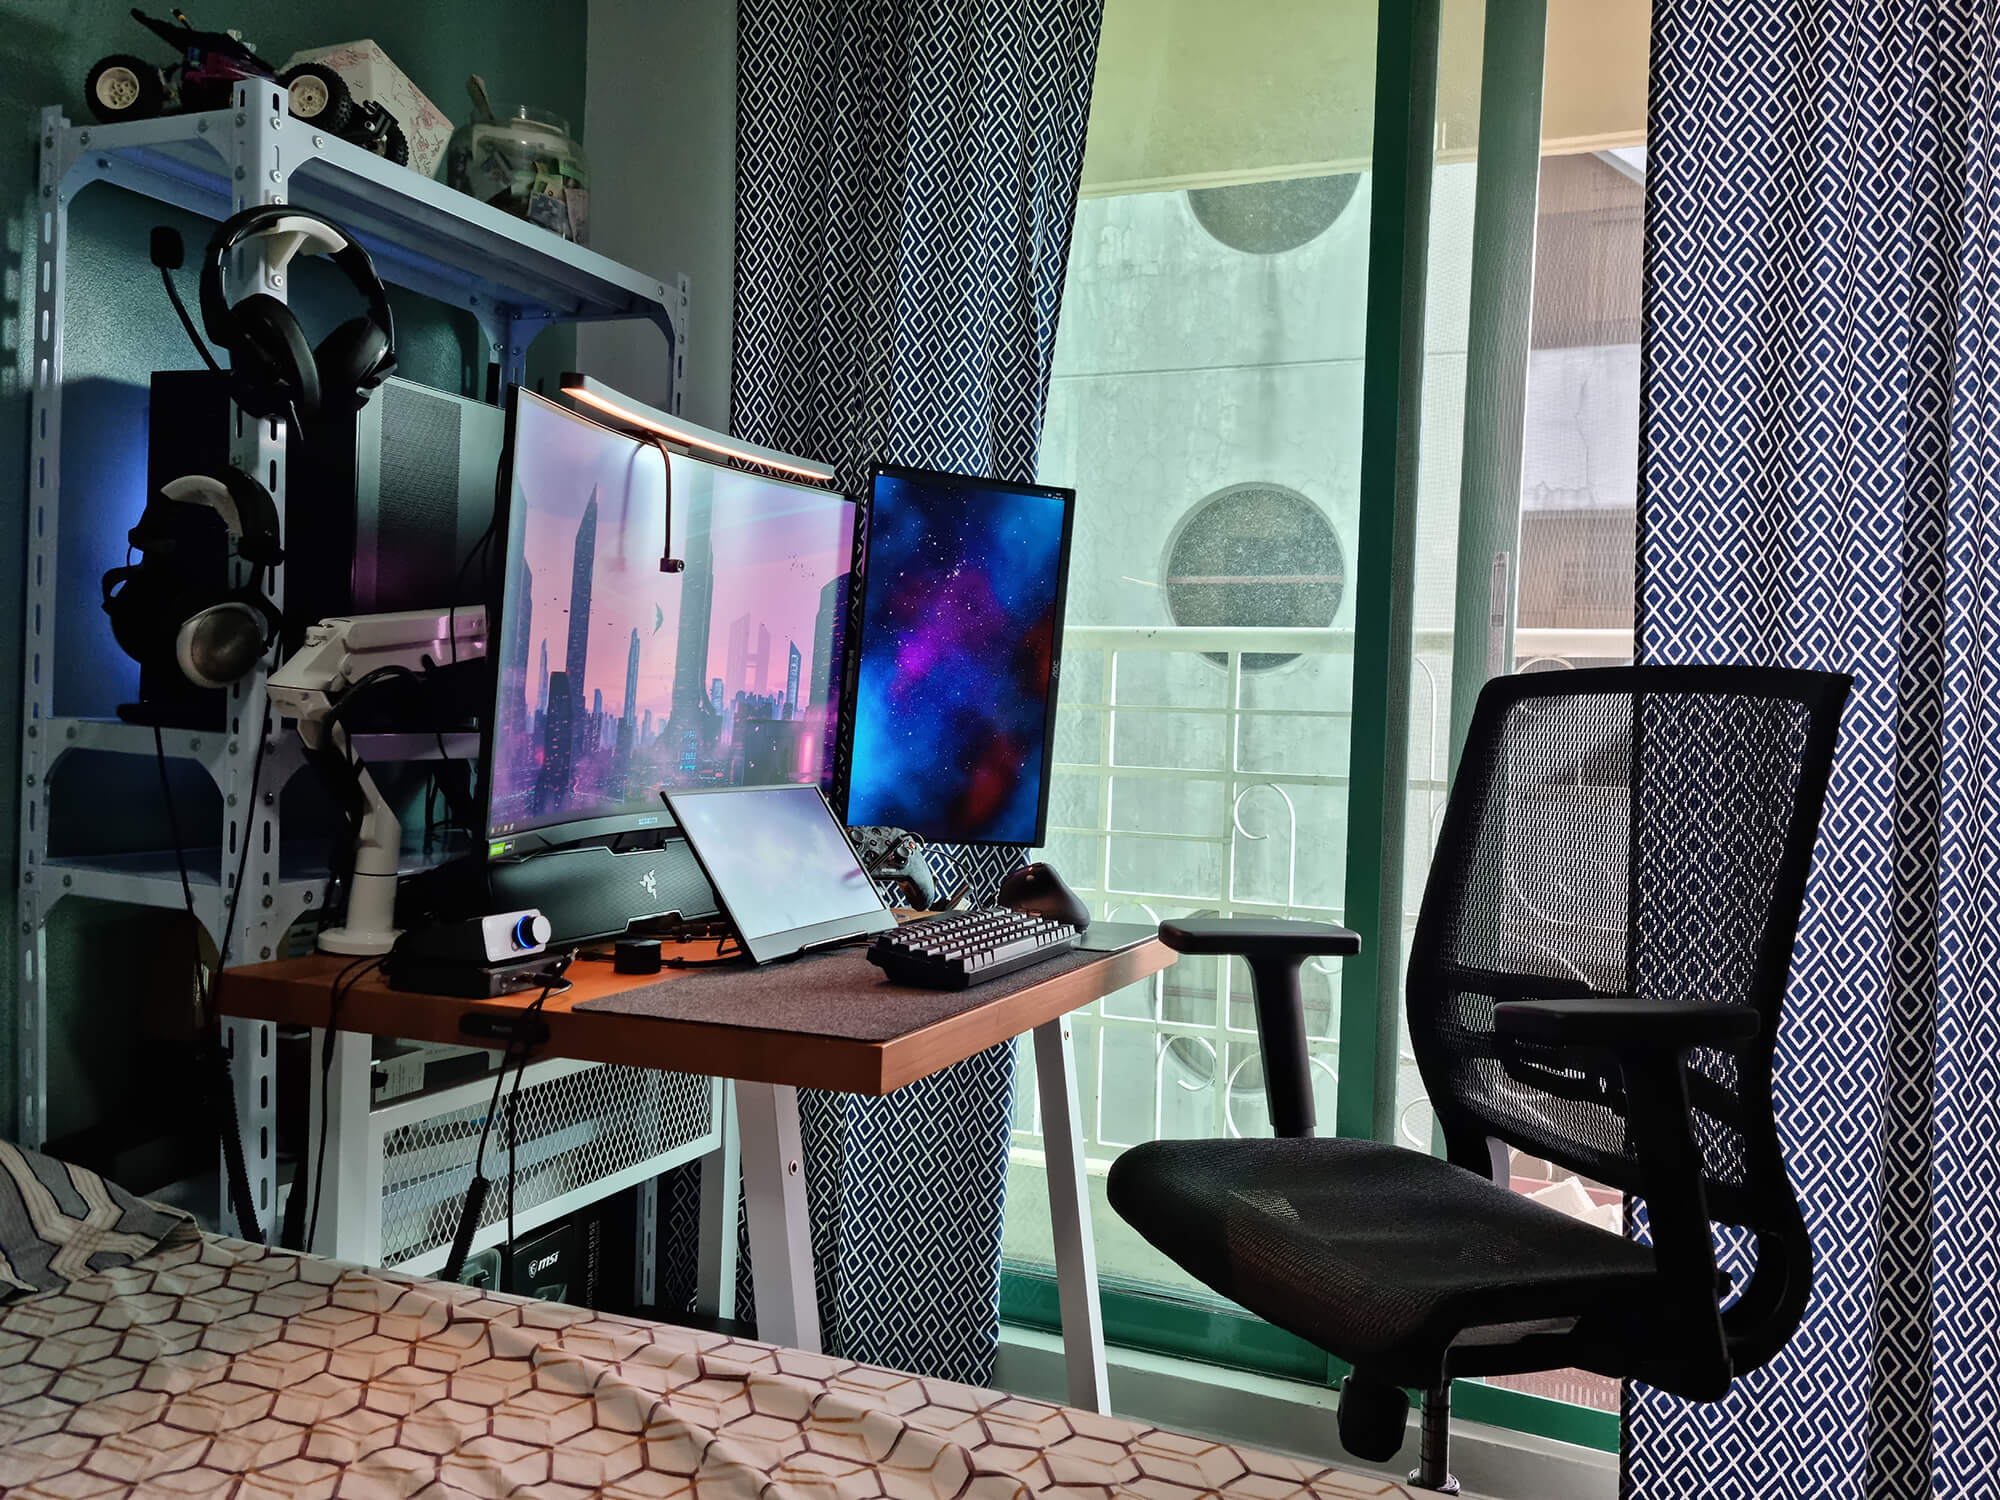 A small home office setup in the Philippines